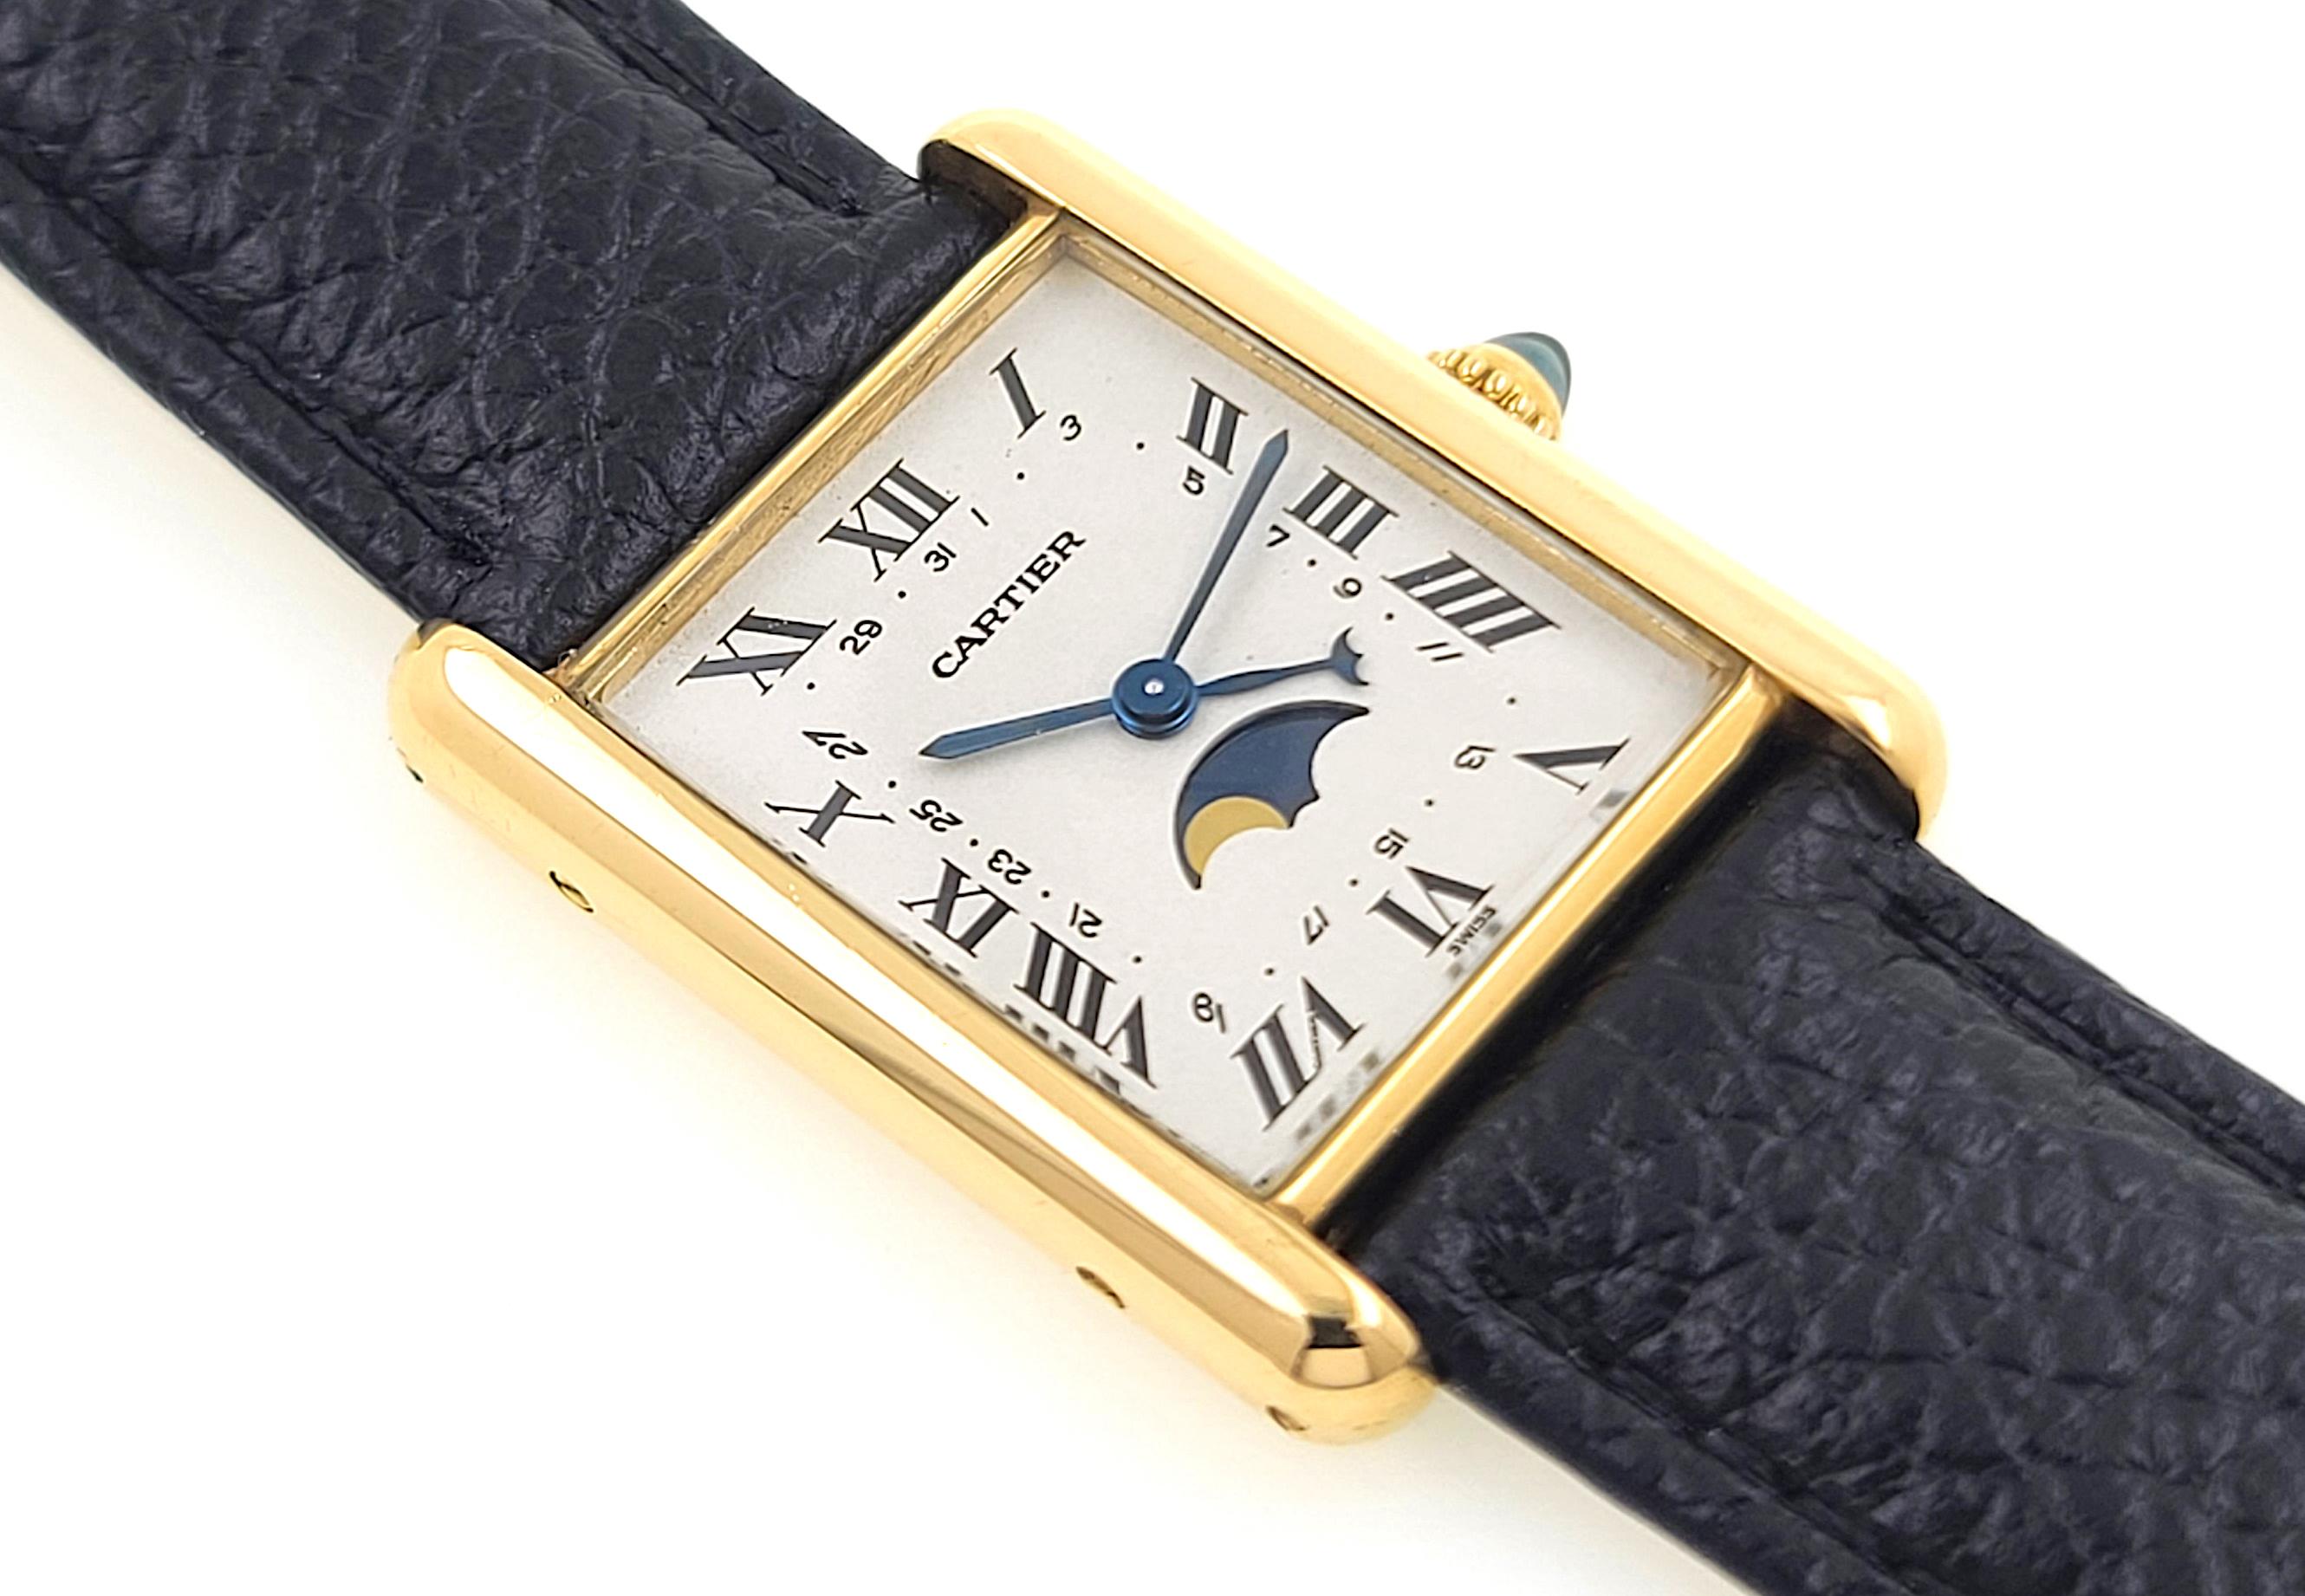 Cabochon Cartier Tank Louis Moonphase Date FULL SET 819001 Large 18k Gold + Folding Clasp